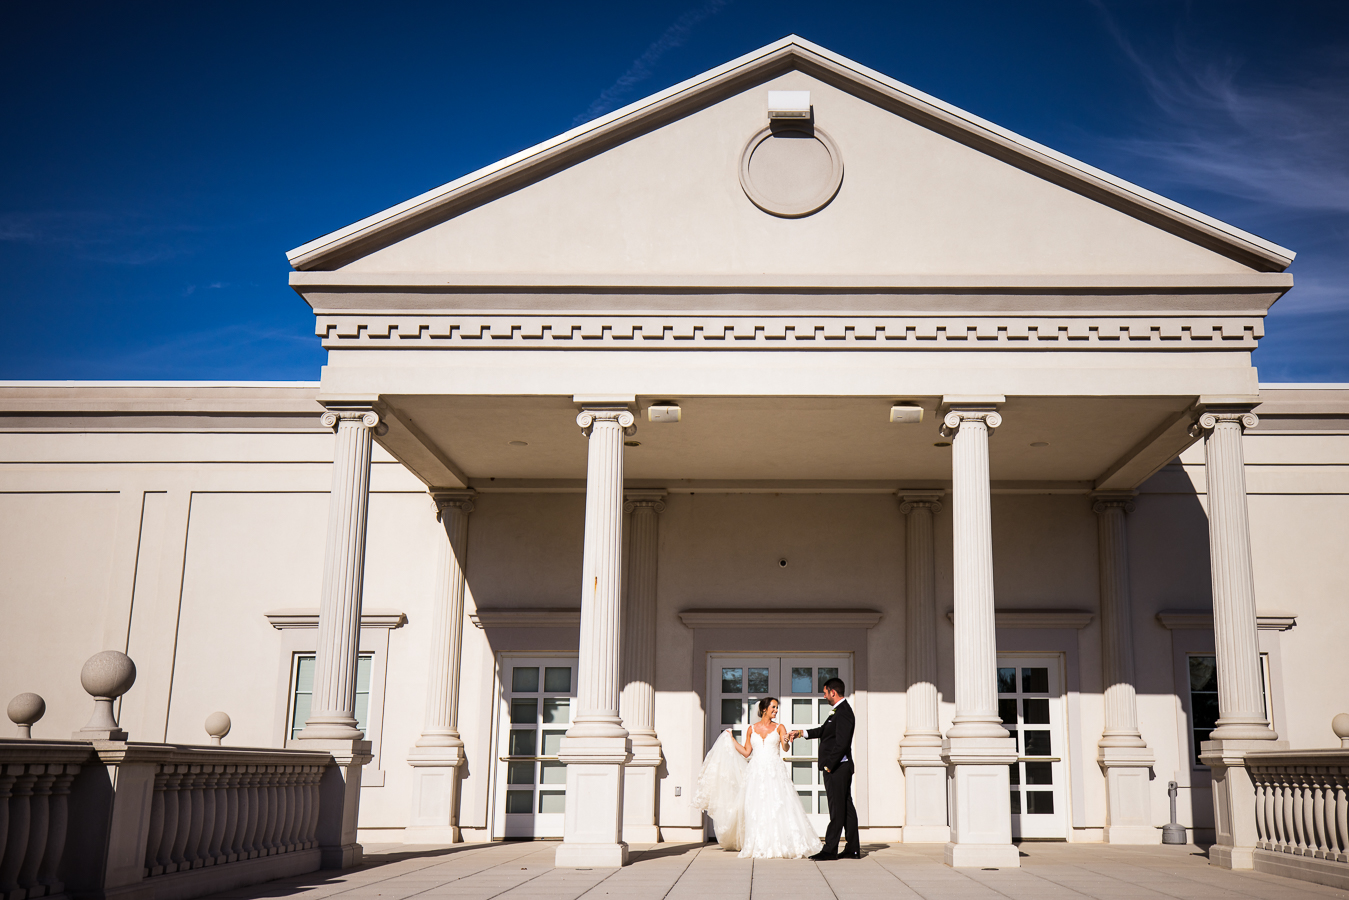 nj wedding photographer, lisa rhinehart, captures this vibrant image of the bride and groom as they stand holding hands underneath the overhang during their first look outside of the palace at somerset park during their black and gold wedding 